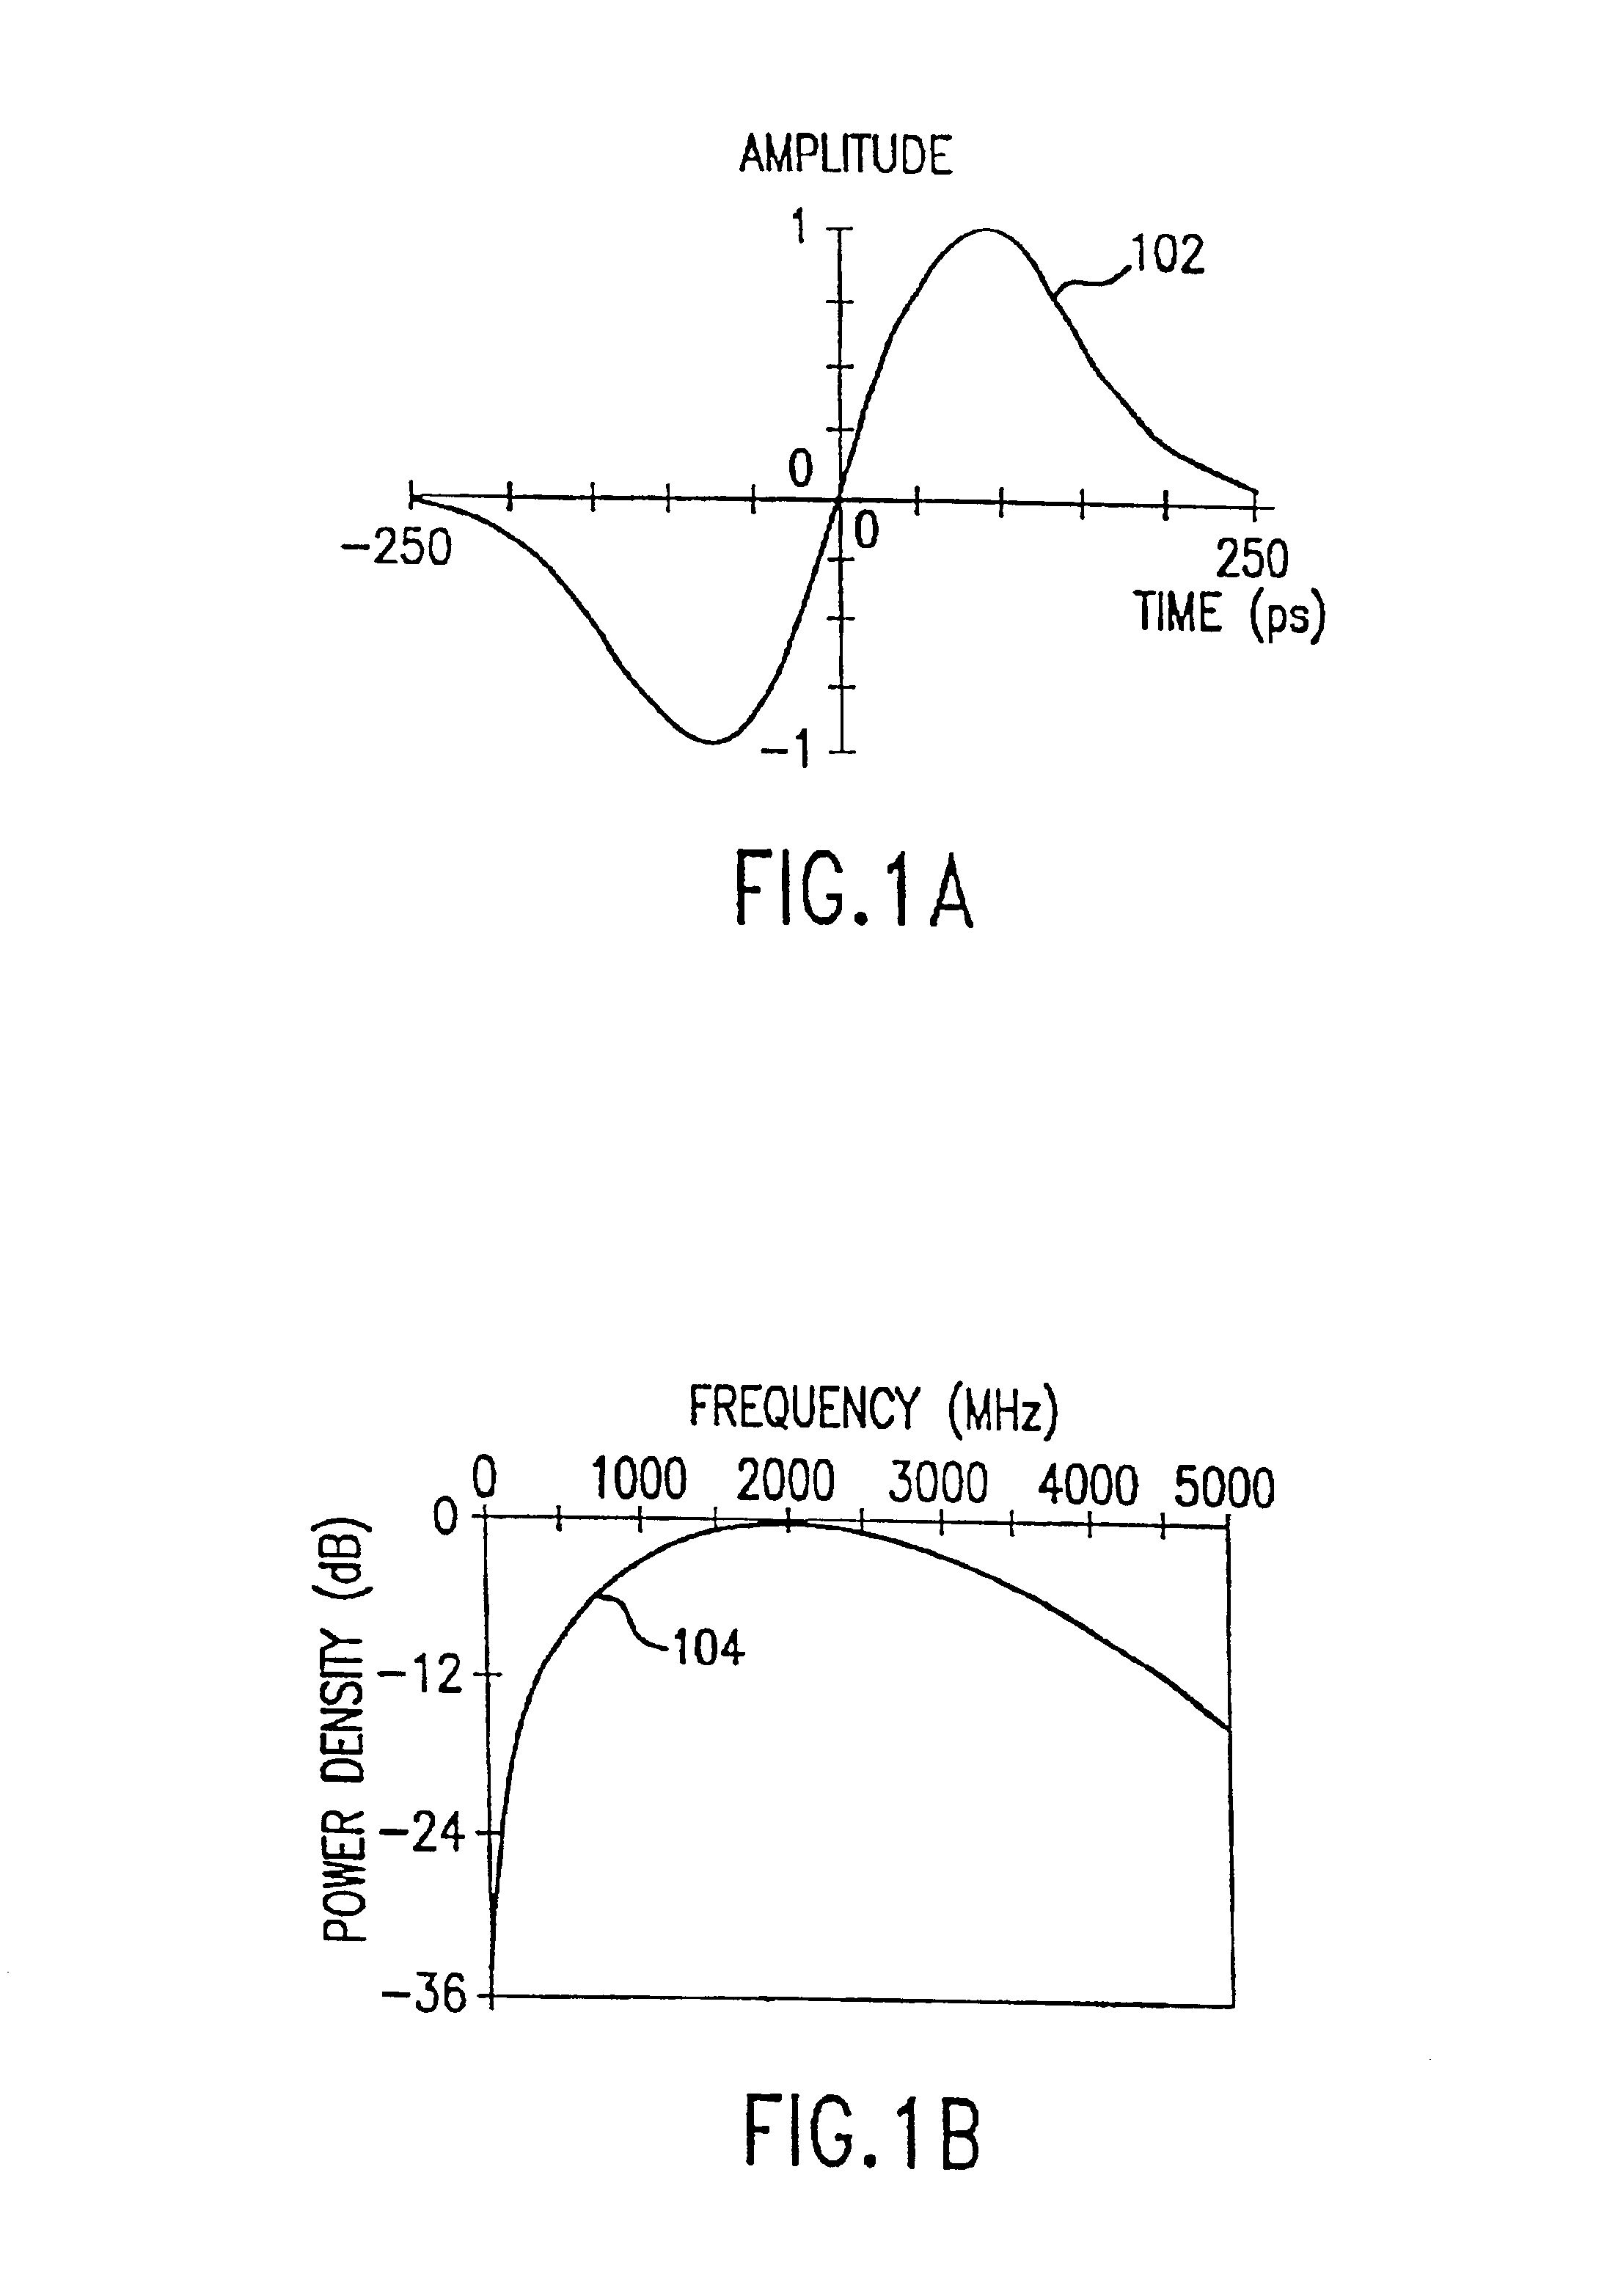 Method and system for reducing potential interference in an impulse radio